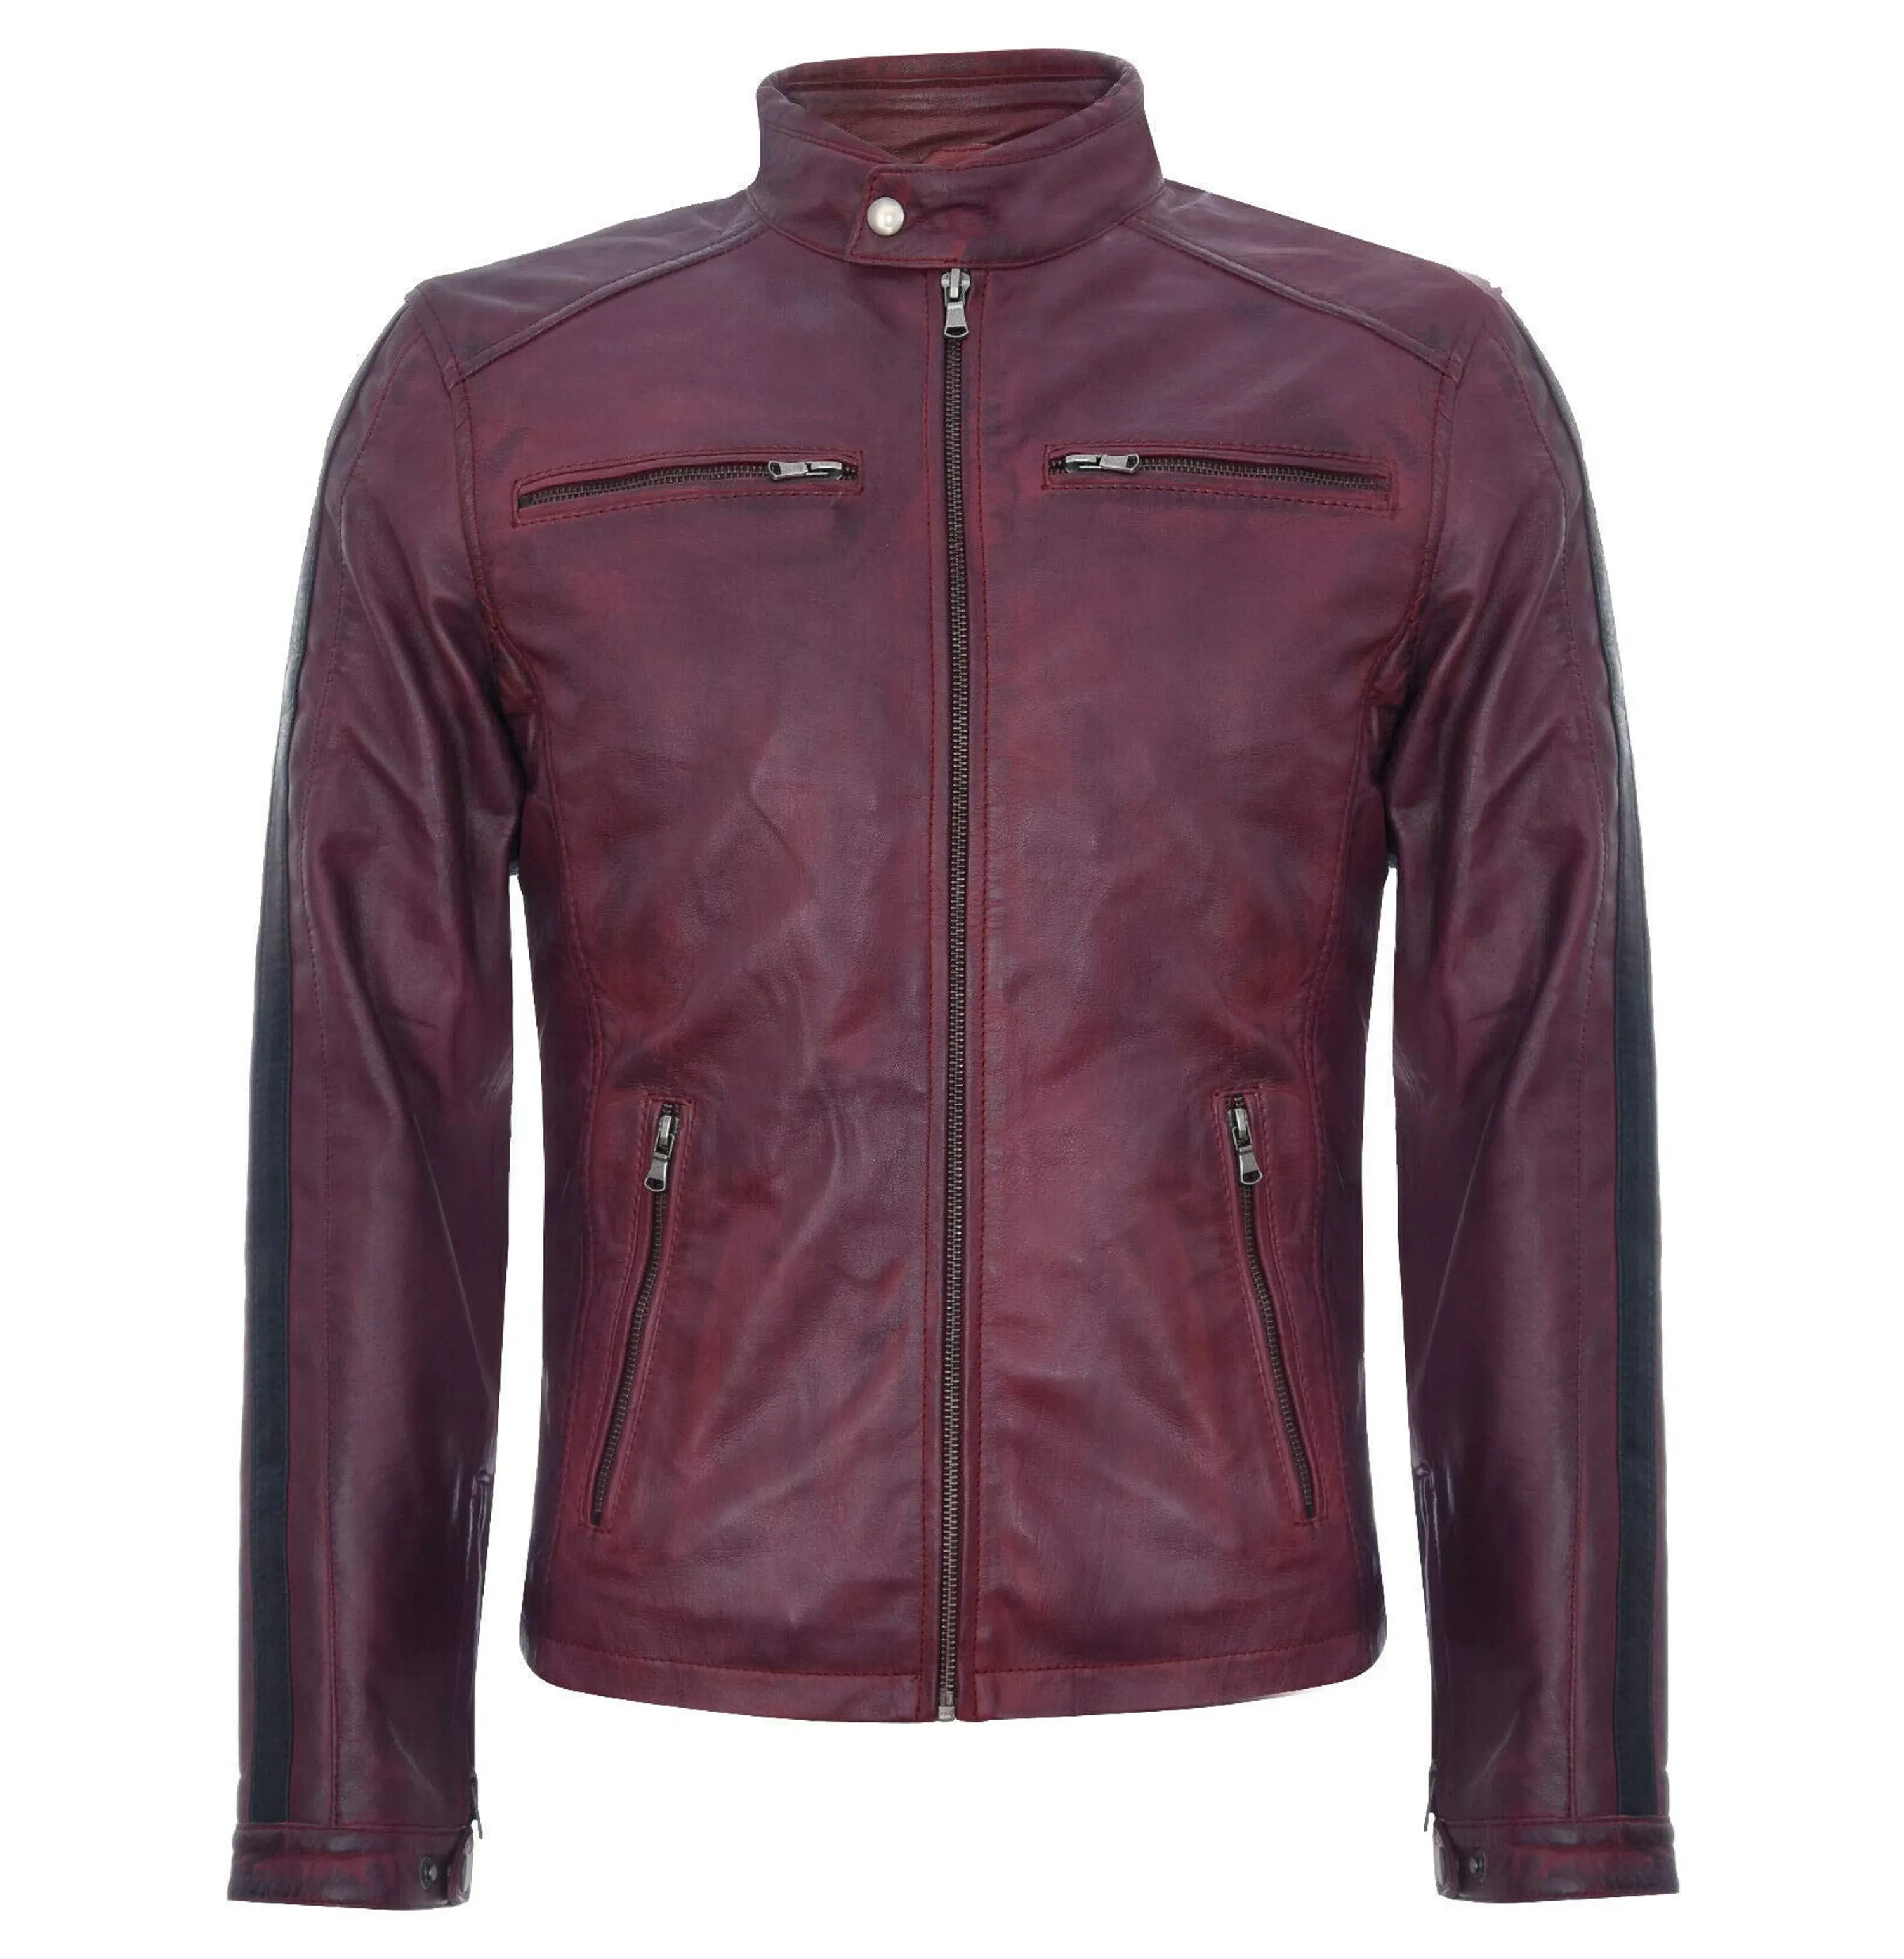 Most Popular Good Quality custom Men Leather Jacket Pakistan Made Top Trending Product Leather Jacket For Men